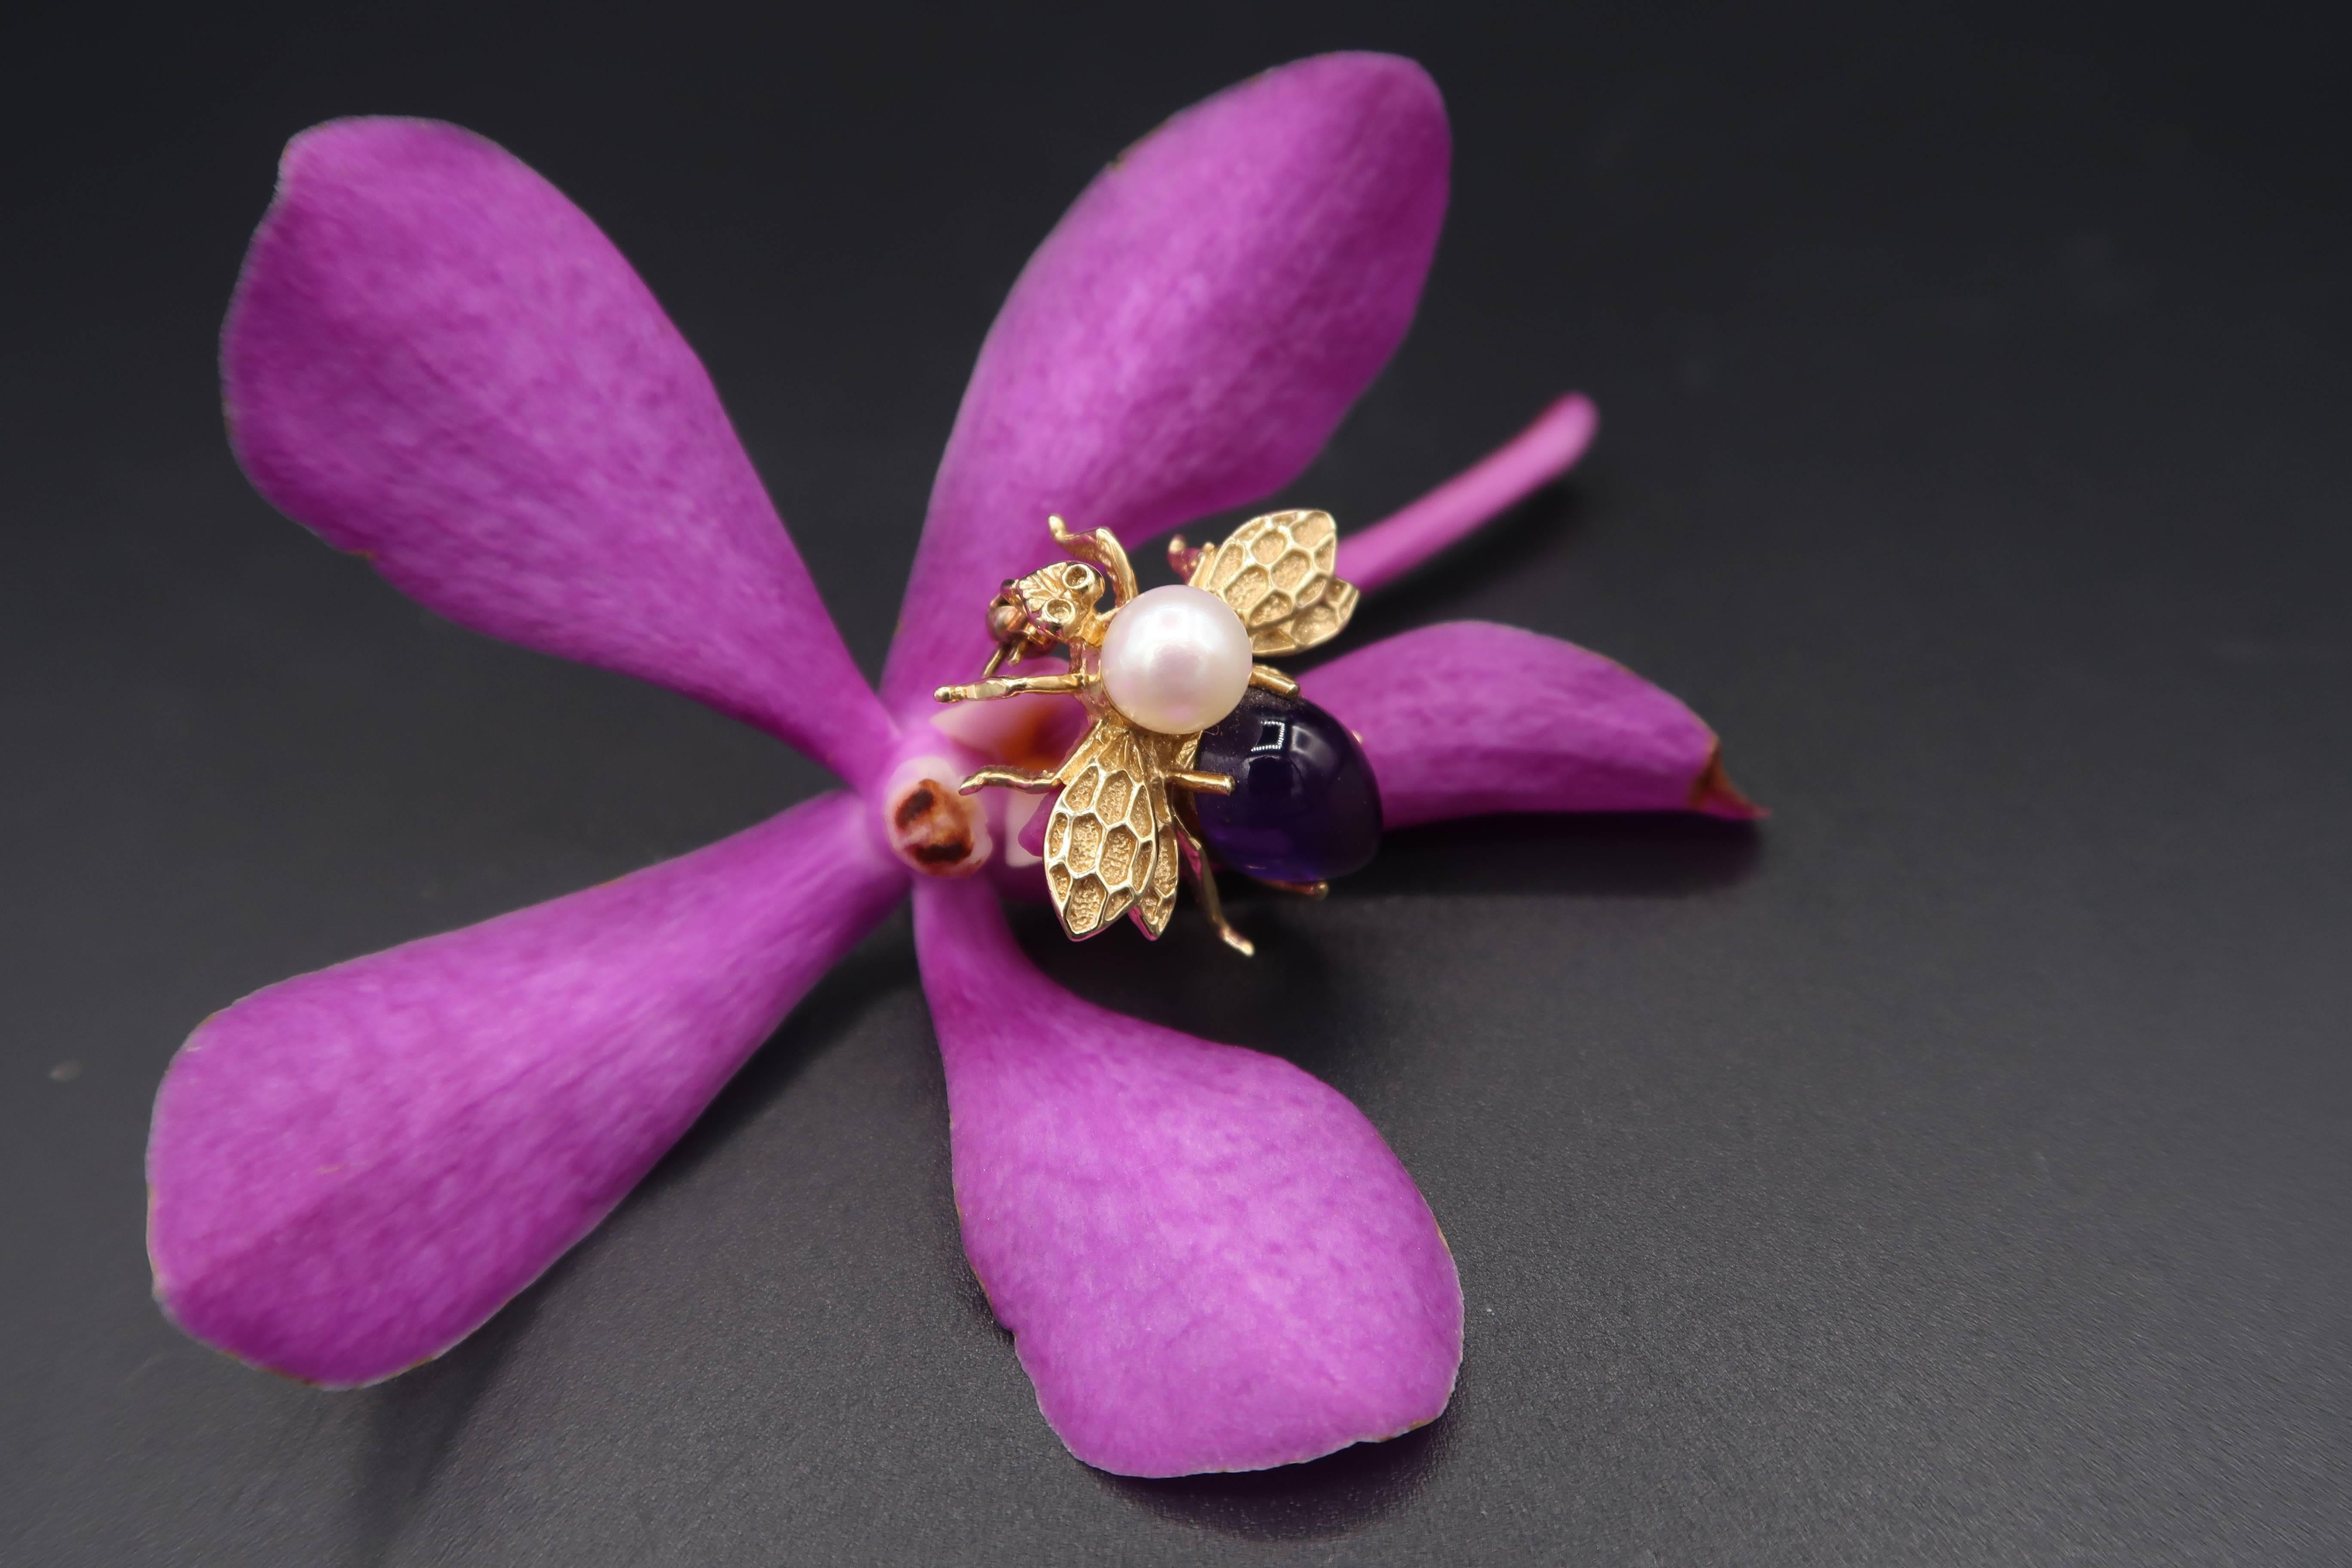 A lovely brooch with minute details of this tiny bee; pollen brushes on its legs, tarsal claws, fore wings, hind wings.

BOON Tiny Bee Brooch with Cabochon Amethyst and Pearl in 18K Yellow Gold
Gold : 4.30g. 18K Yellow Gold
Amethyst : 3.10ct. 
Pearl